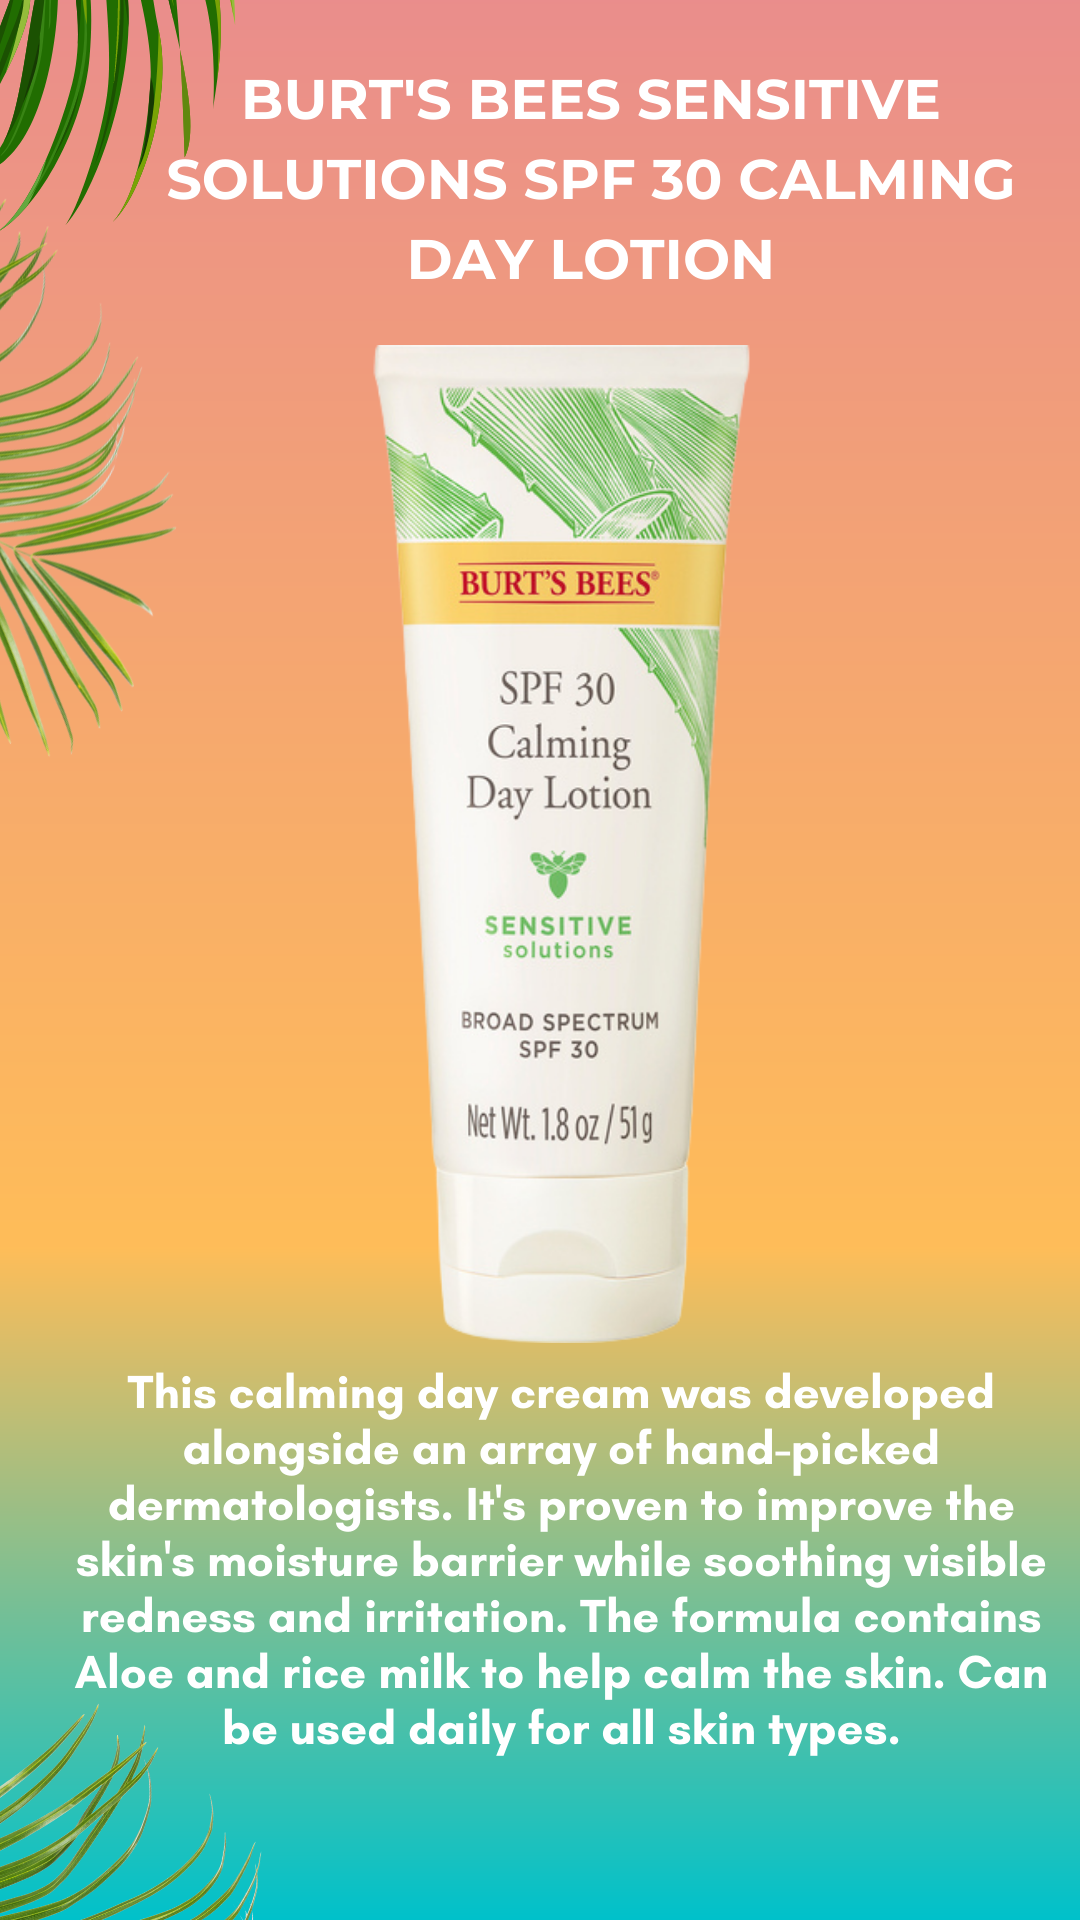 Burts Bees Senstiive Solutions Calming Day Lotion